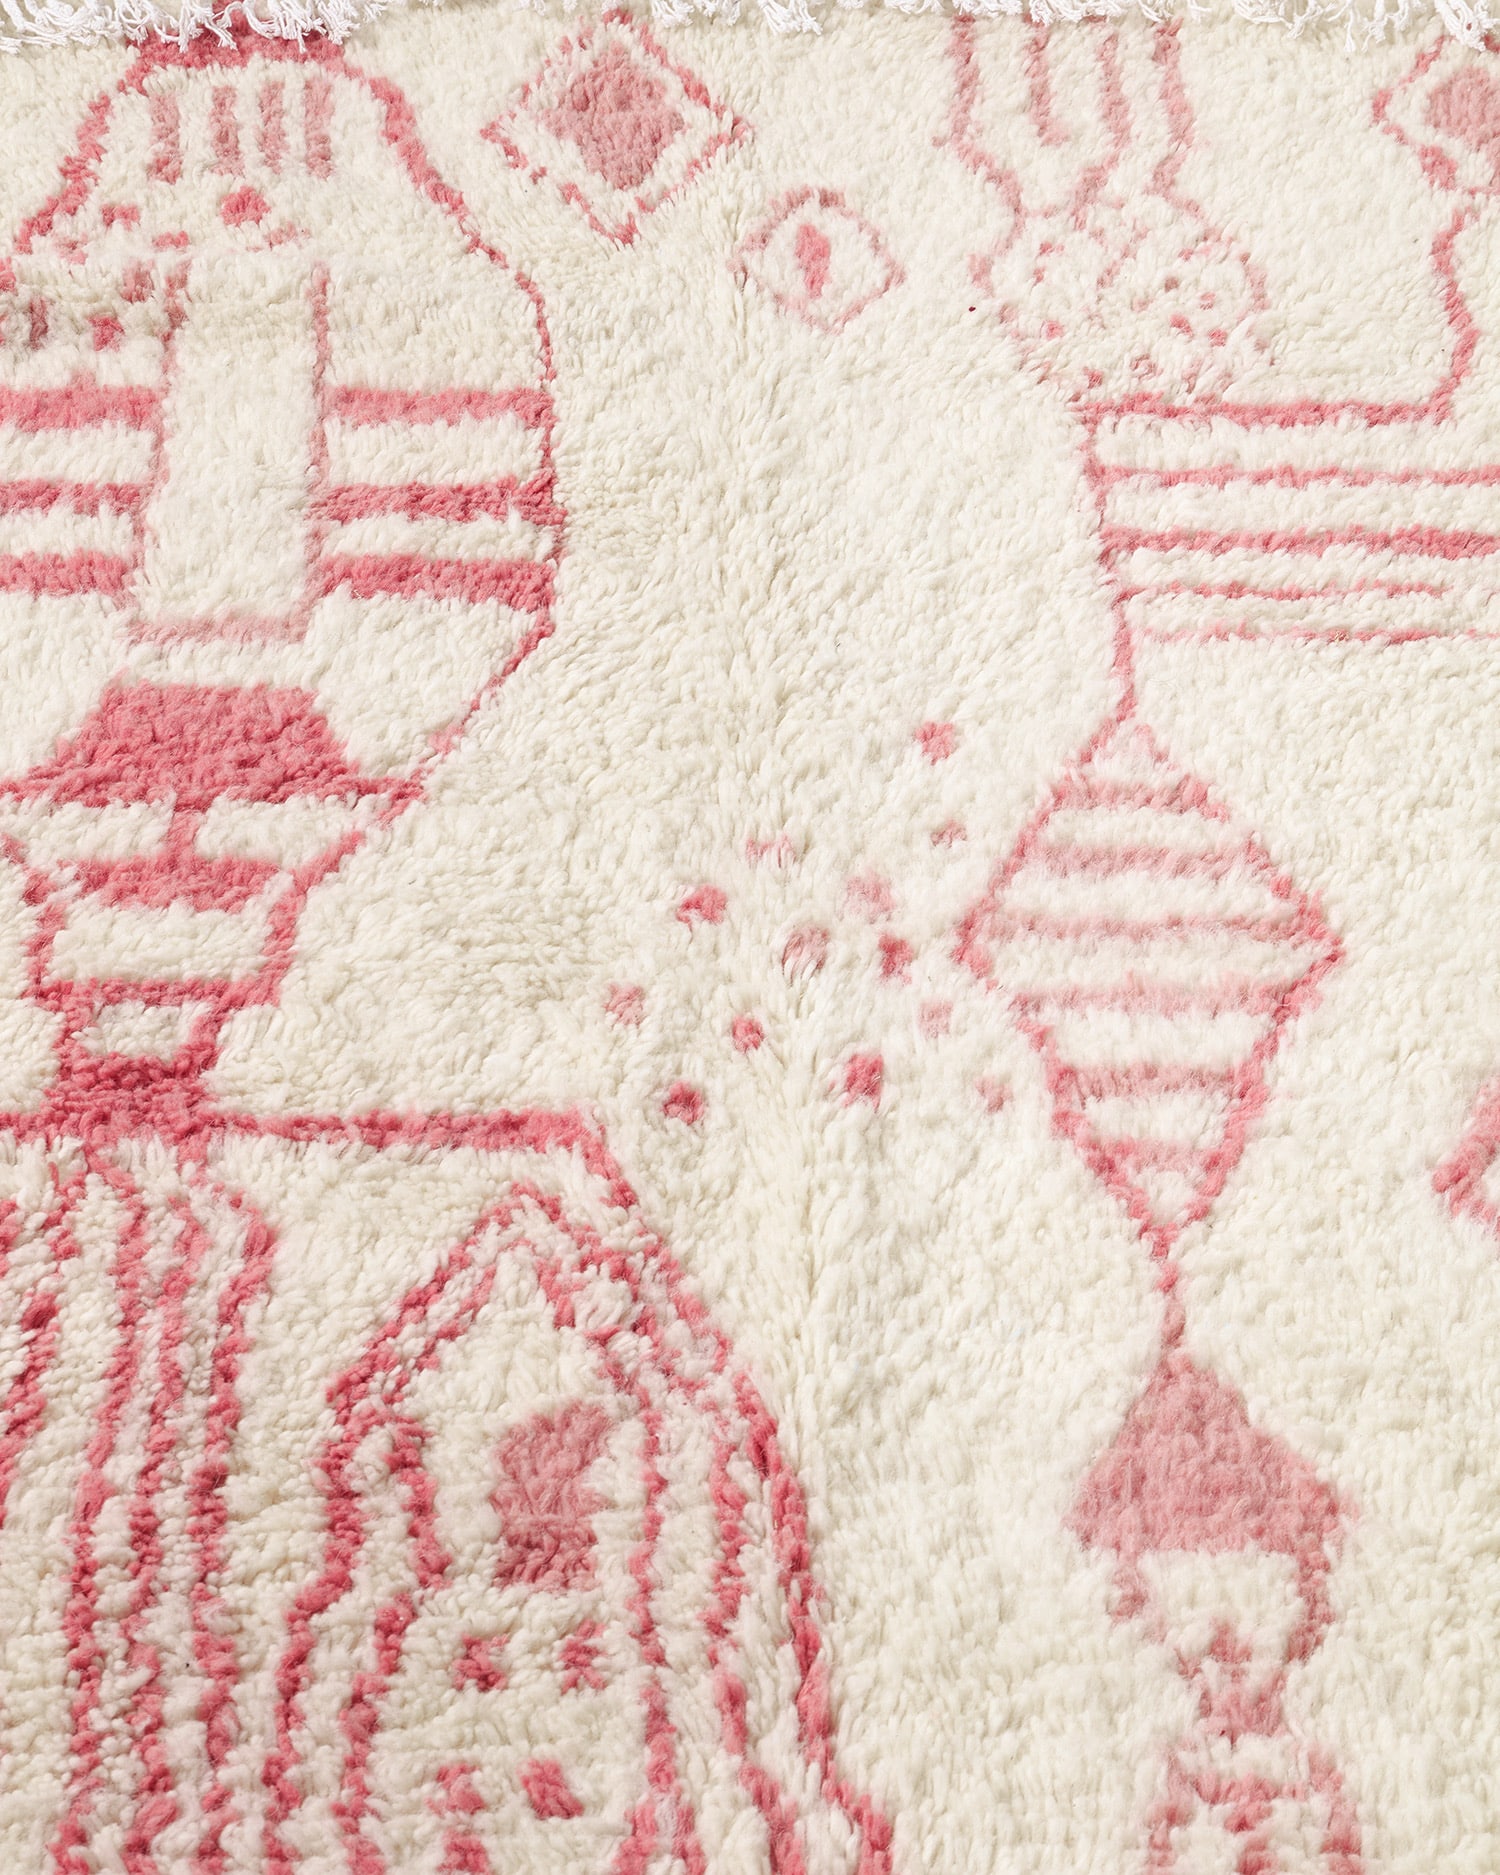 Rug with pink line drawings